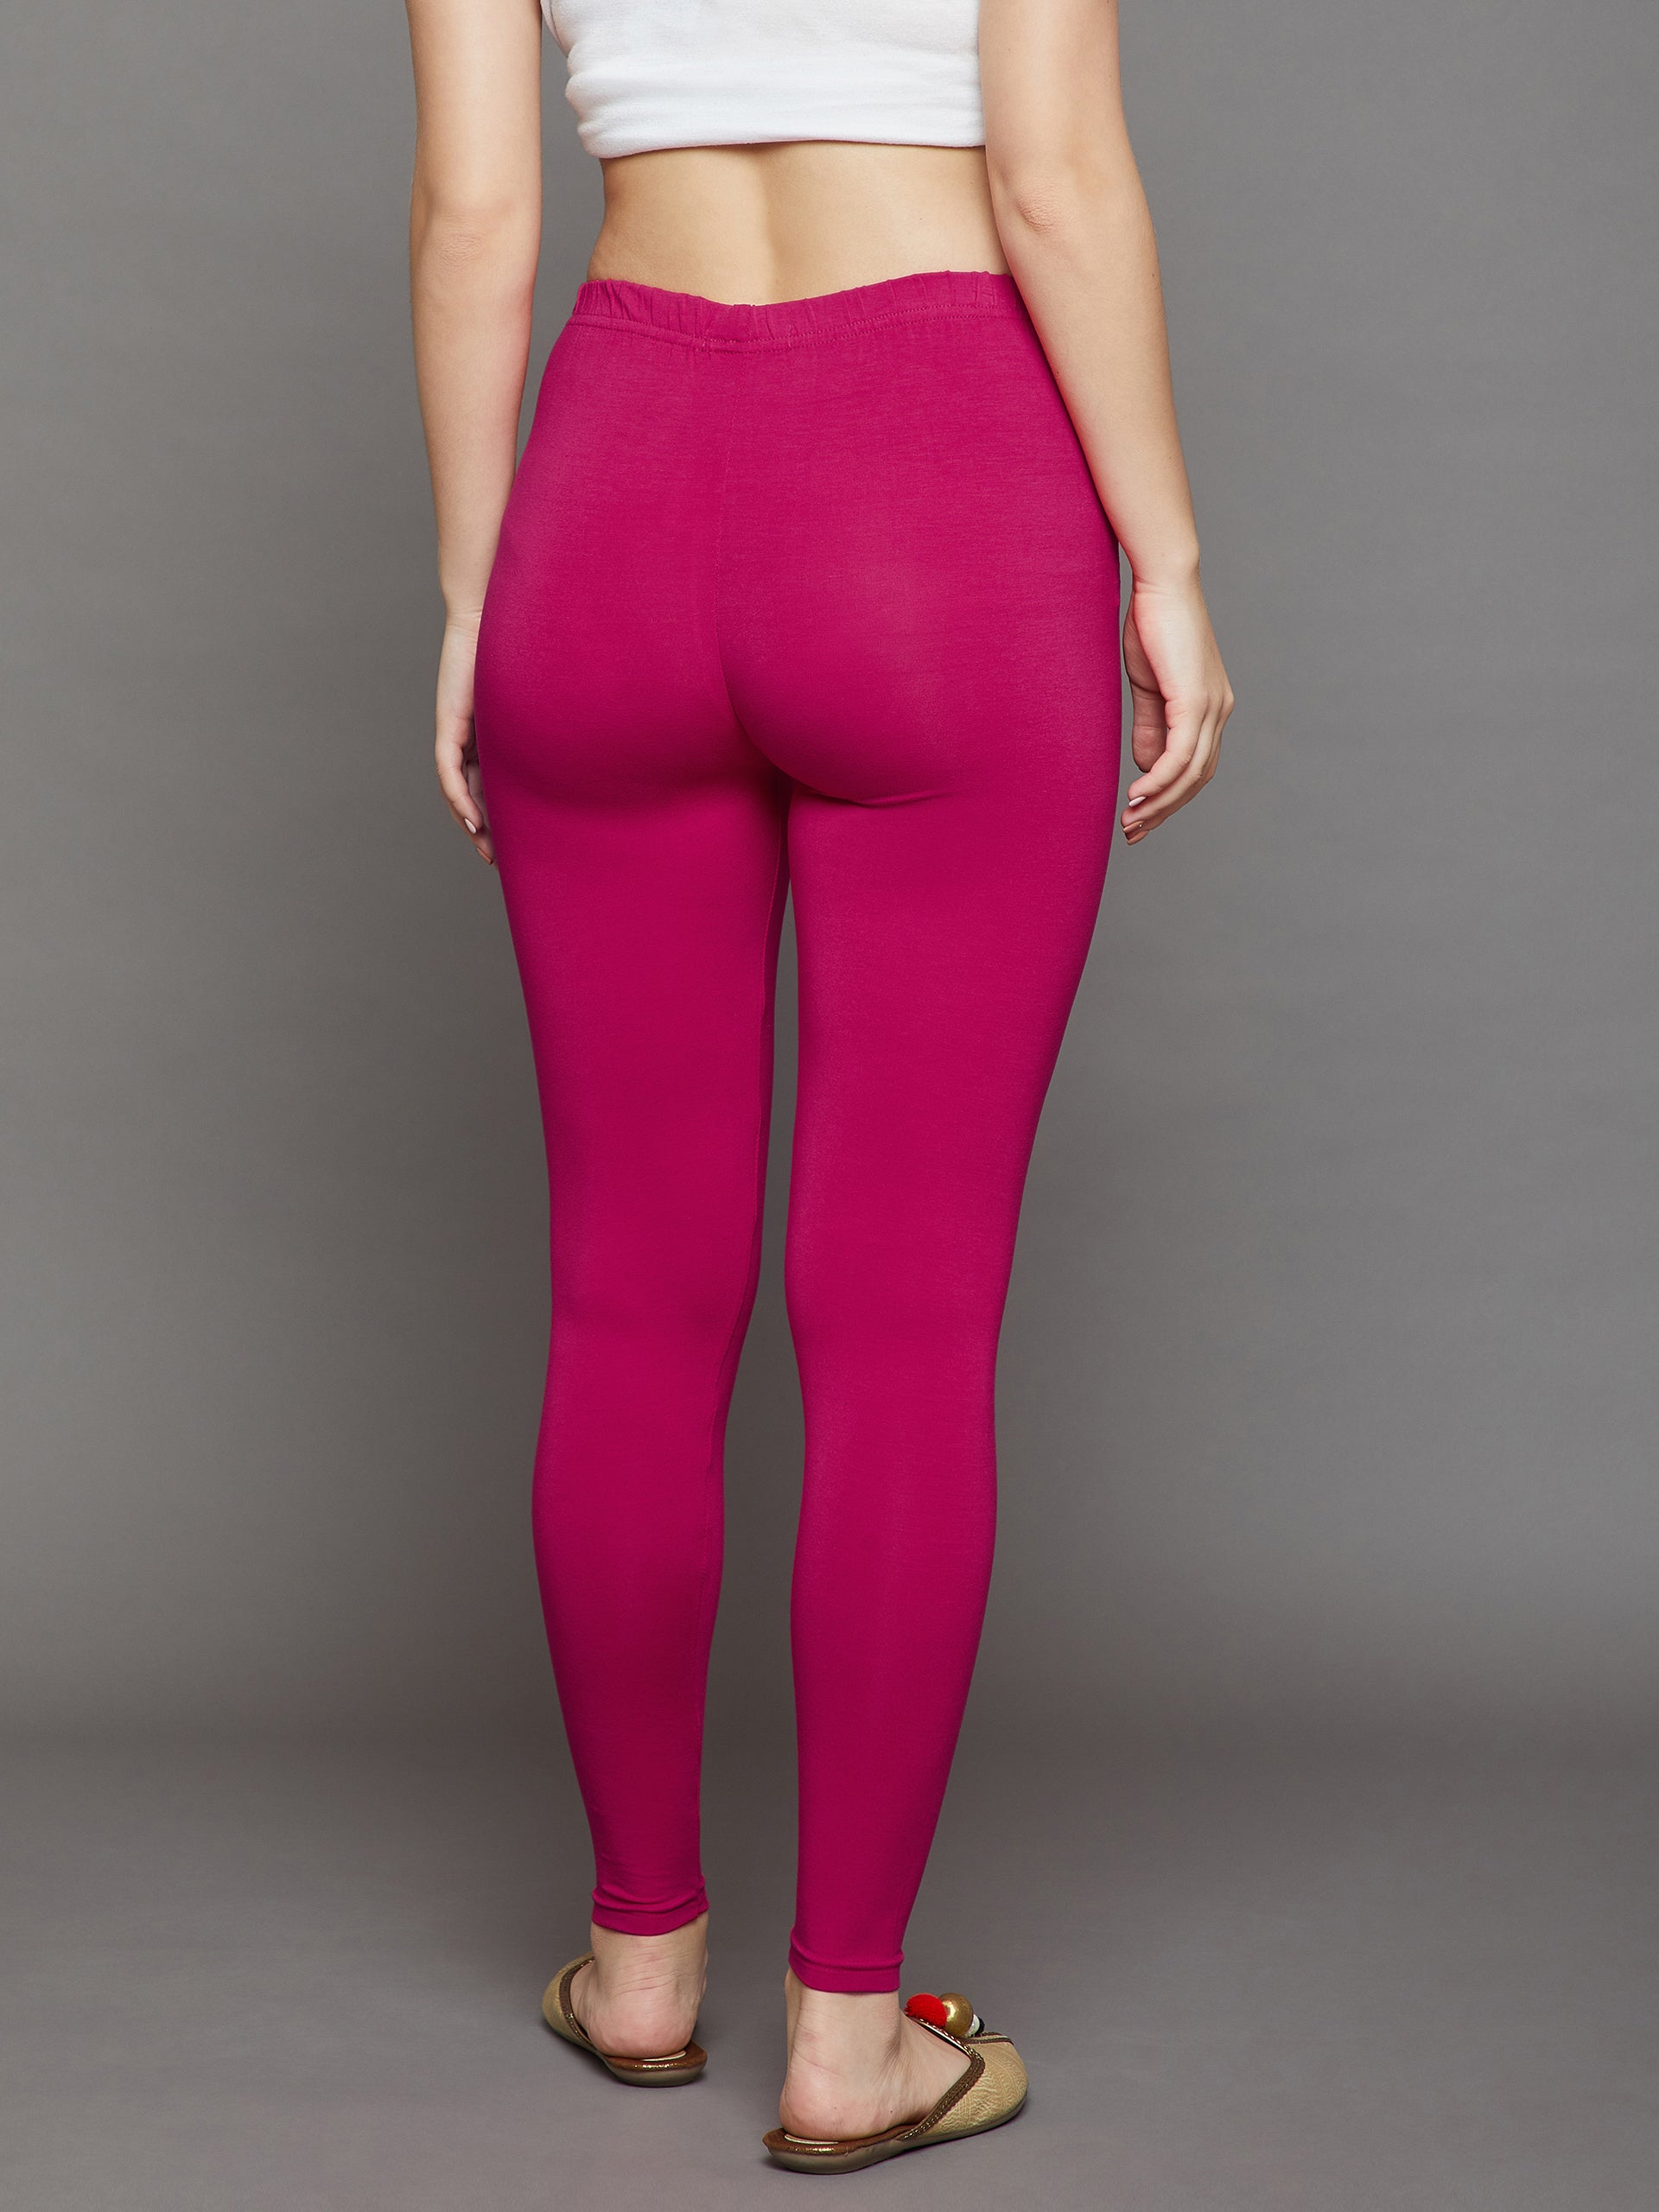 Wednesday (Exclusive) - High-quality Handcrafted Vibrant Leggings